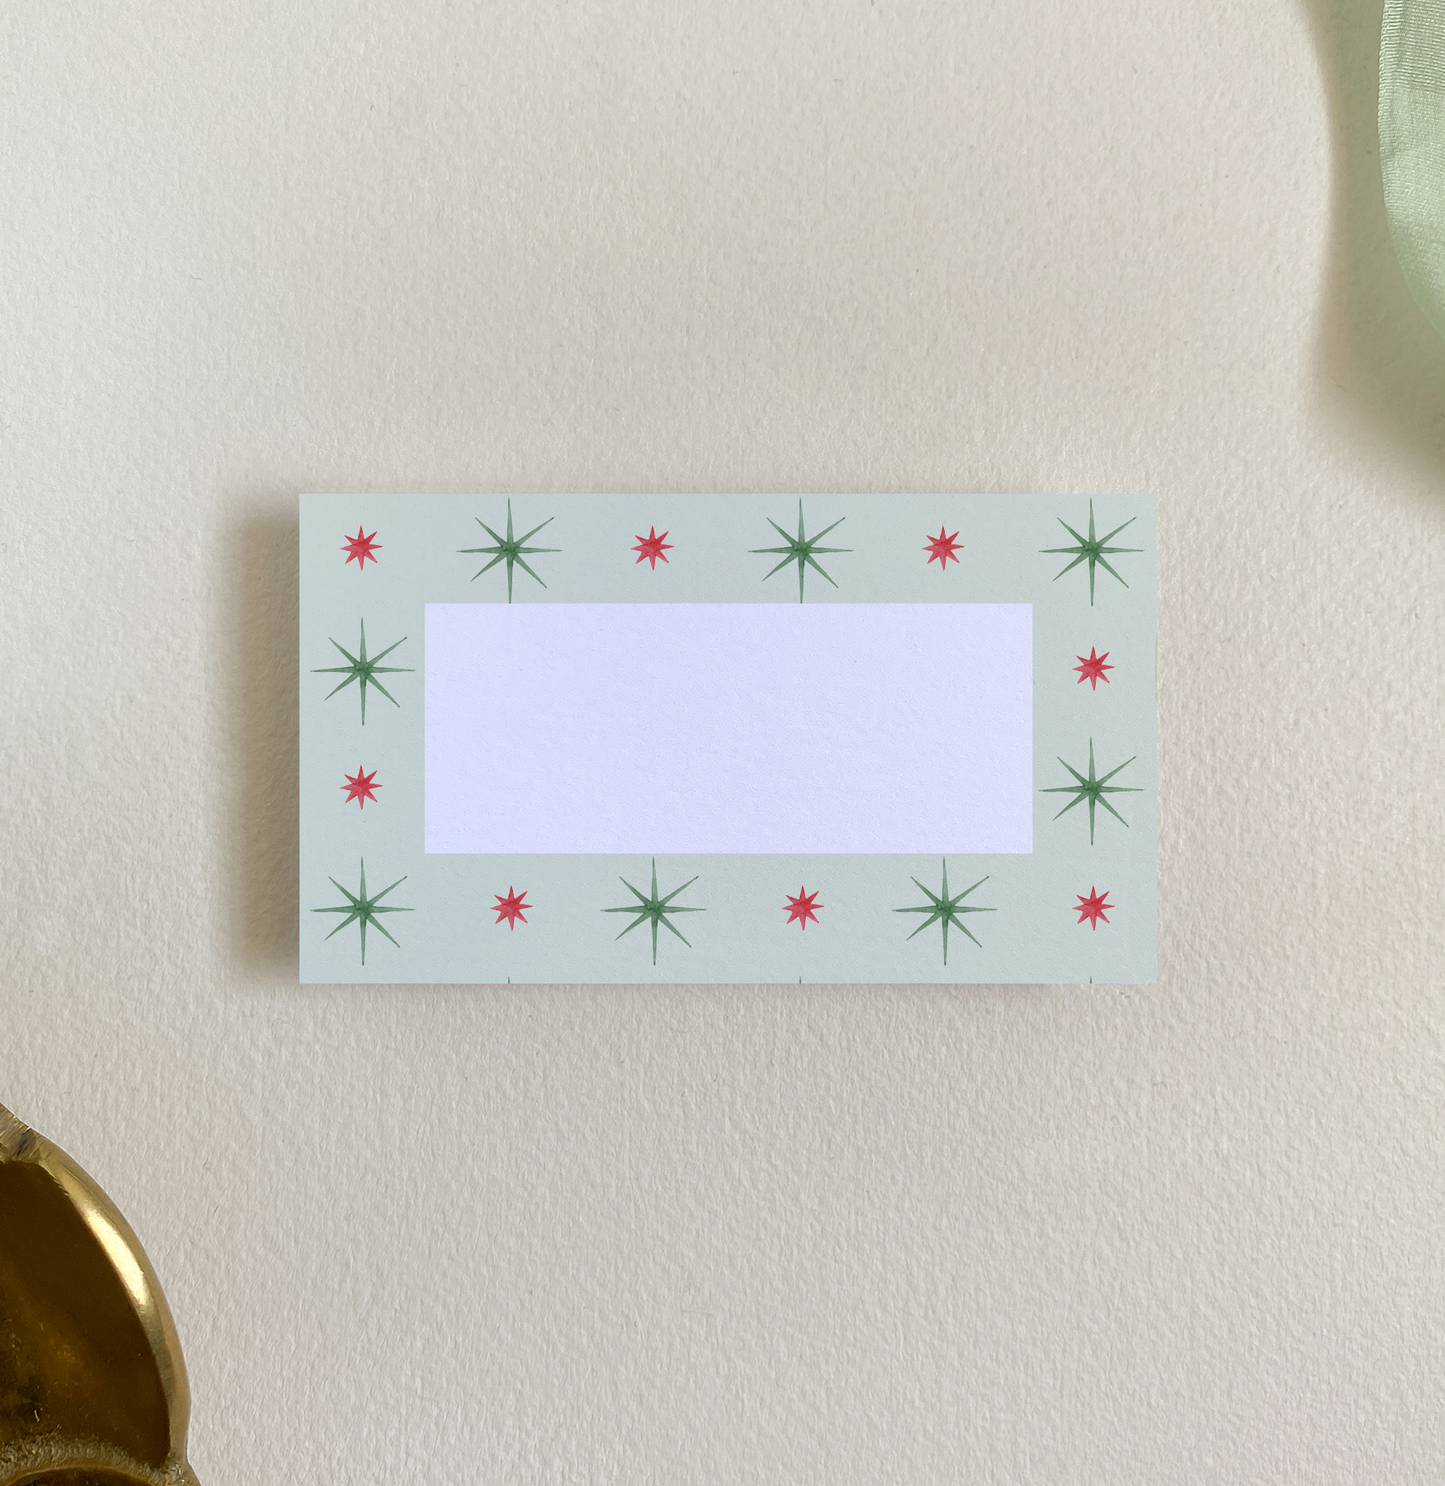 Red and Green Starburst Border Place Card Set